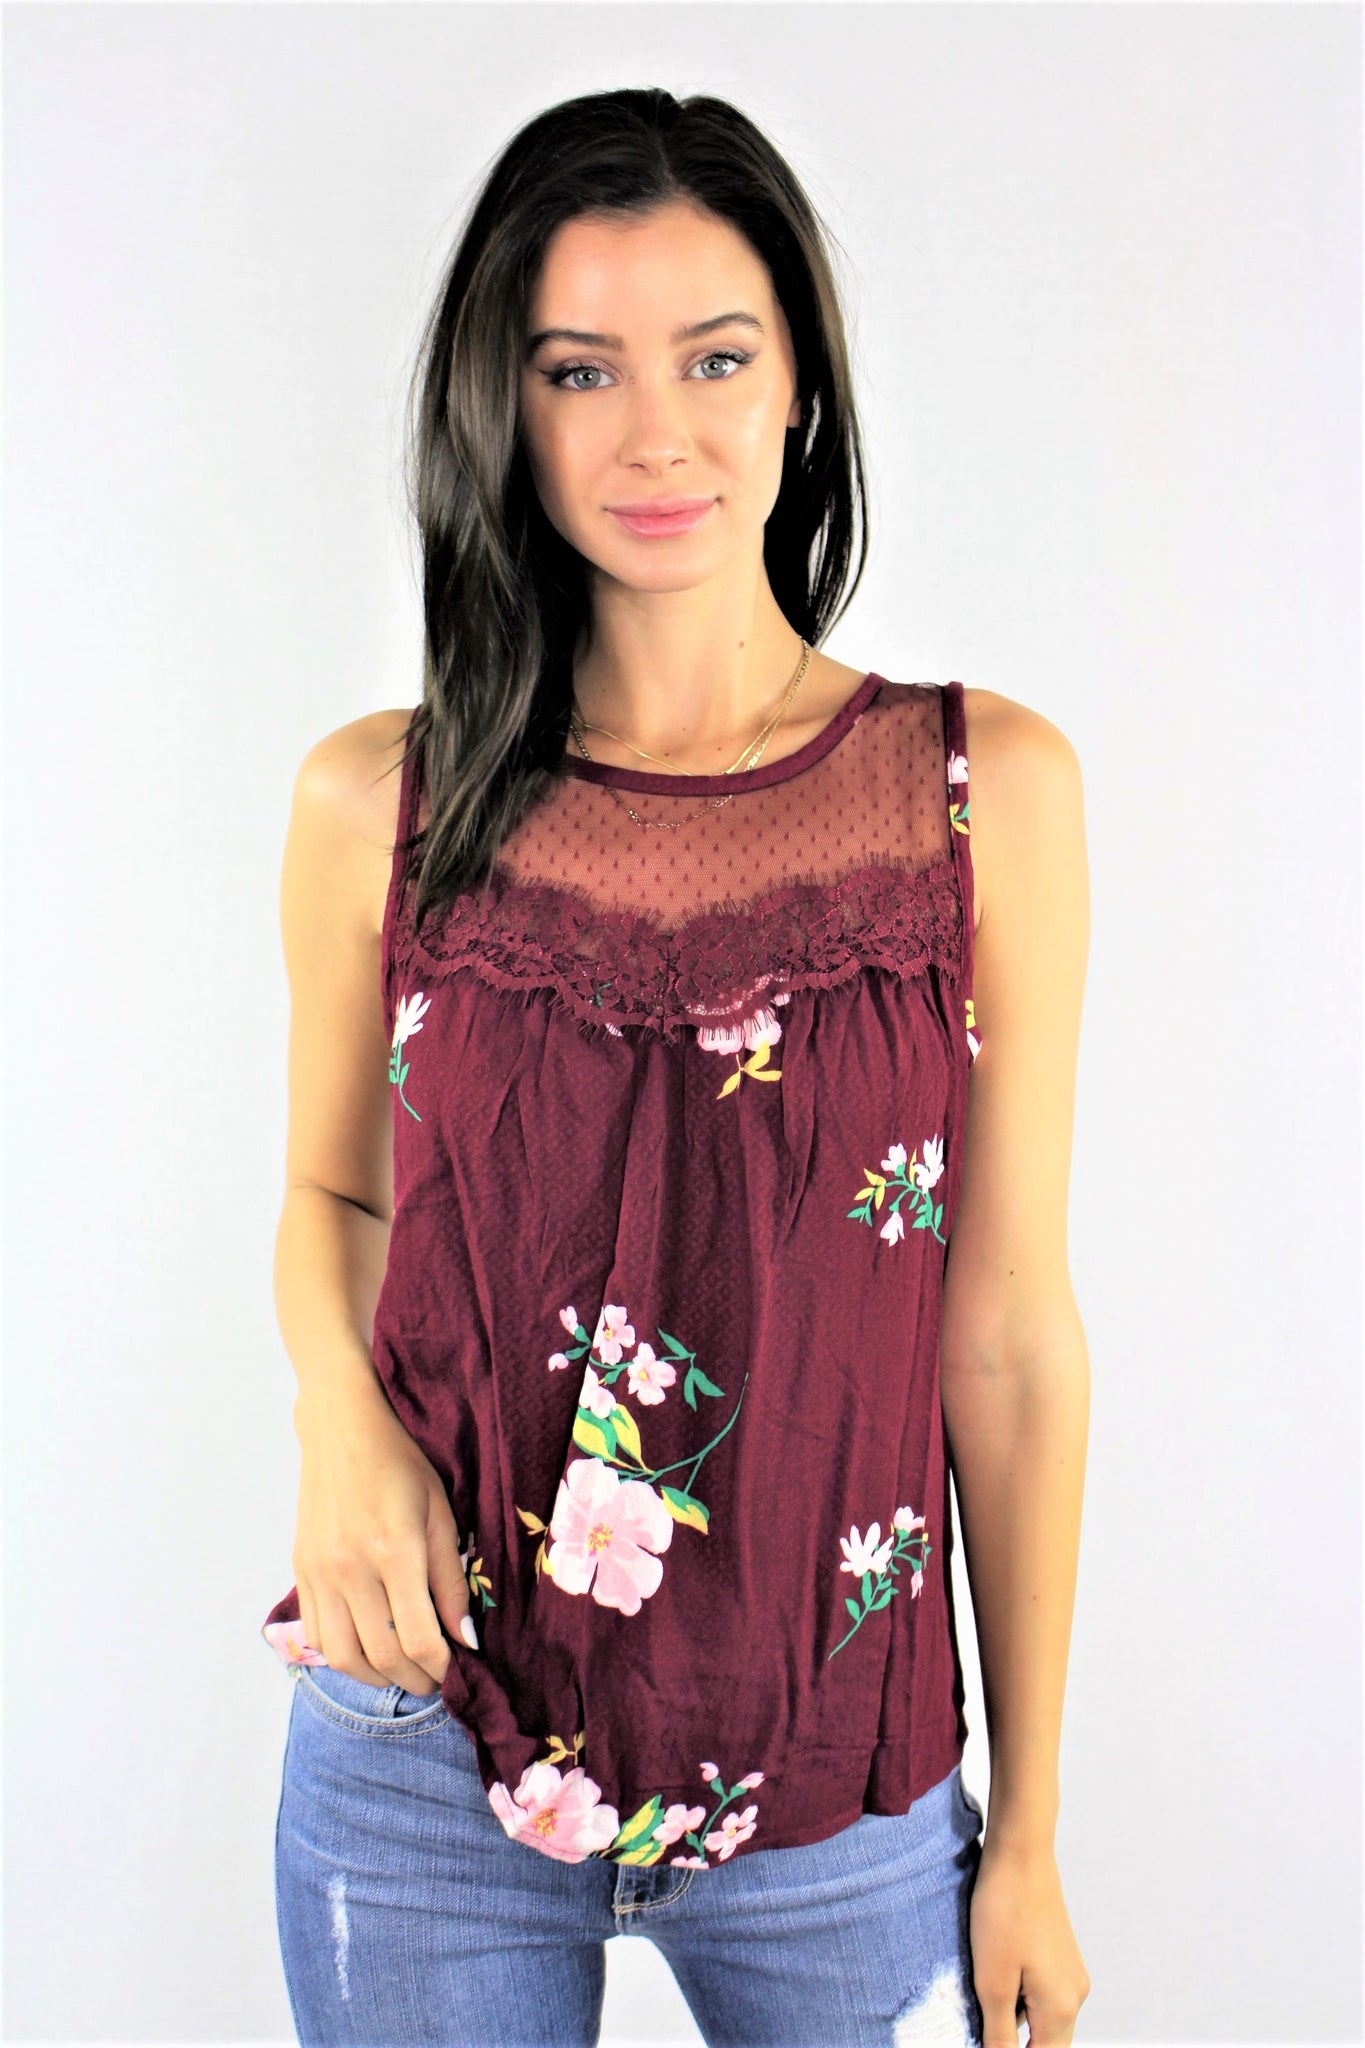 New Women's Boutique Sleeveless Floral Top with Lace Detail S & M Only